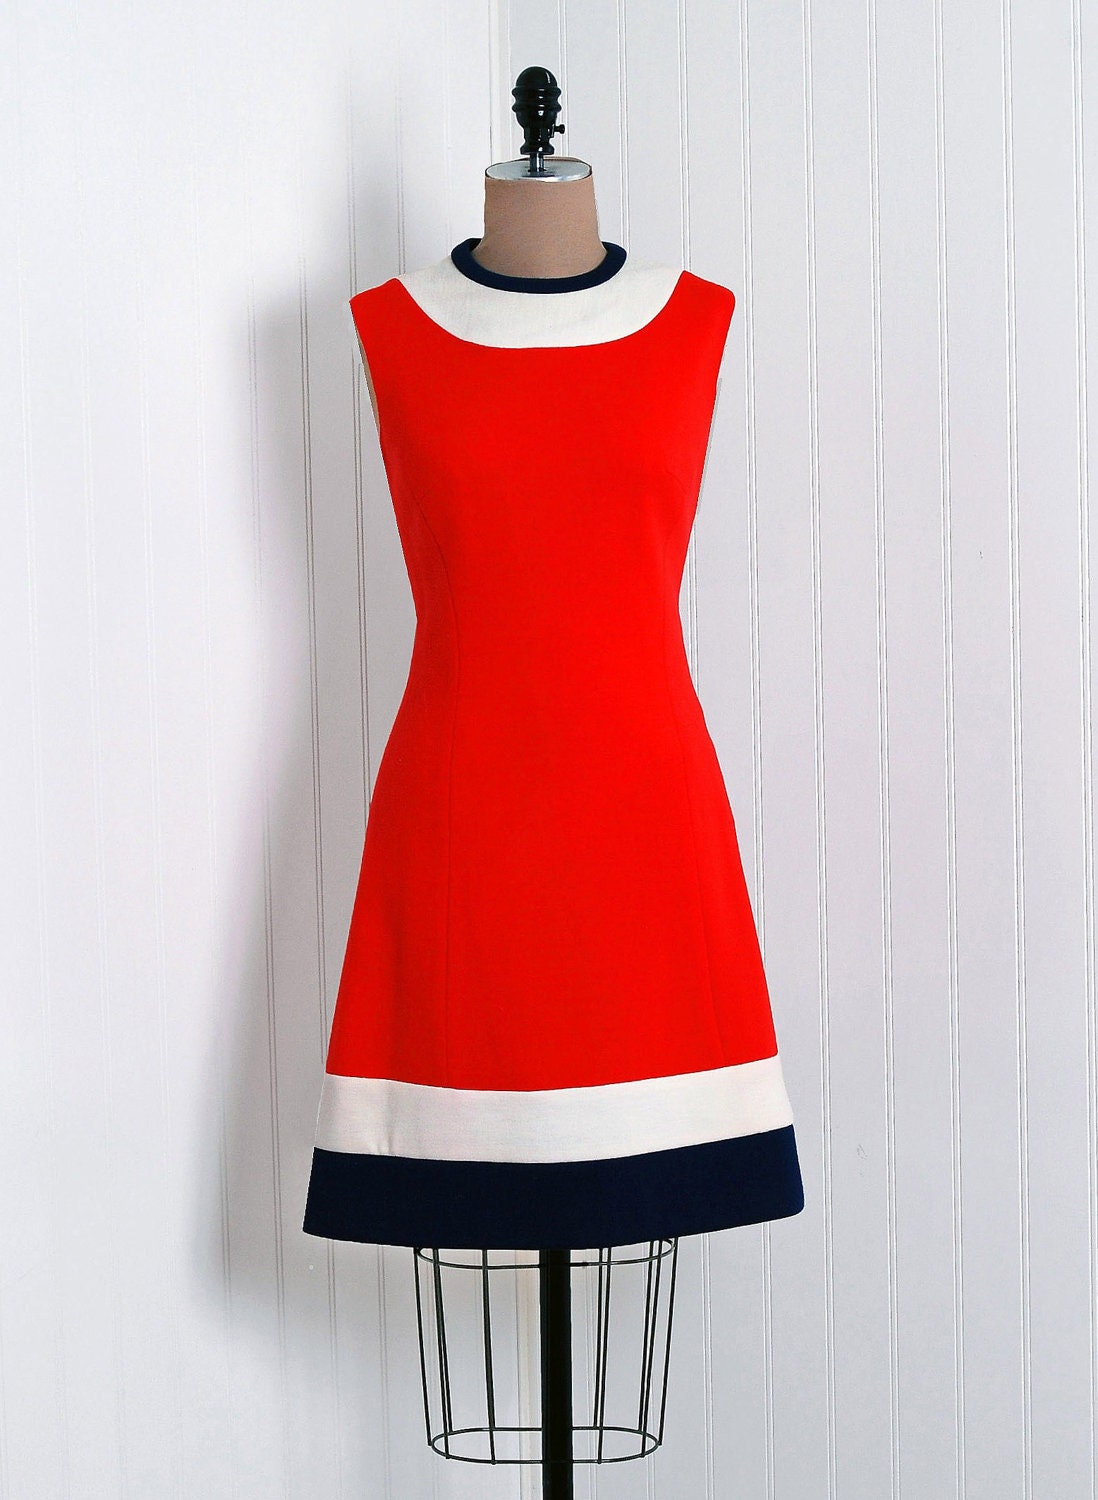 1960's Vintage Lilli Ann Designer-Couture Red,Navy-Blue and Ivory Wool-Knit Military Block-Color Stripe Belted-Waist Stewardess Space-Age Pleated Mod Swing-Skirt Princess Career Cocktail Party Coat-Jacket and Matching Go-Go Shift Sleeveless Dress Suit